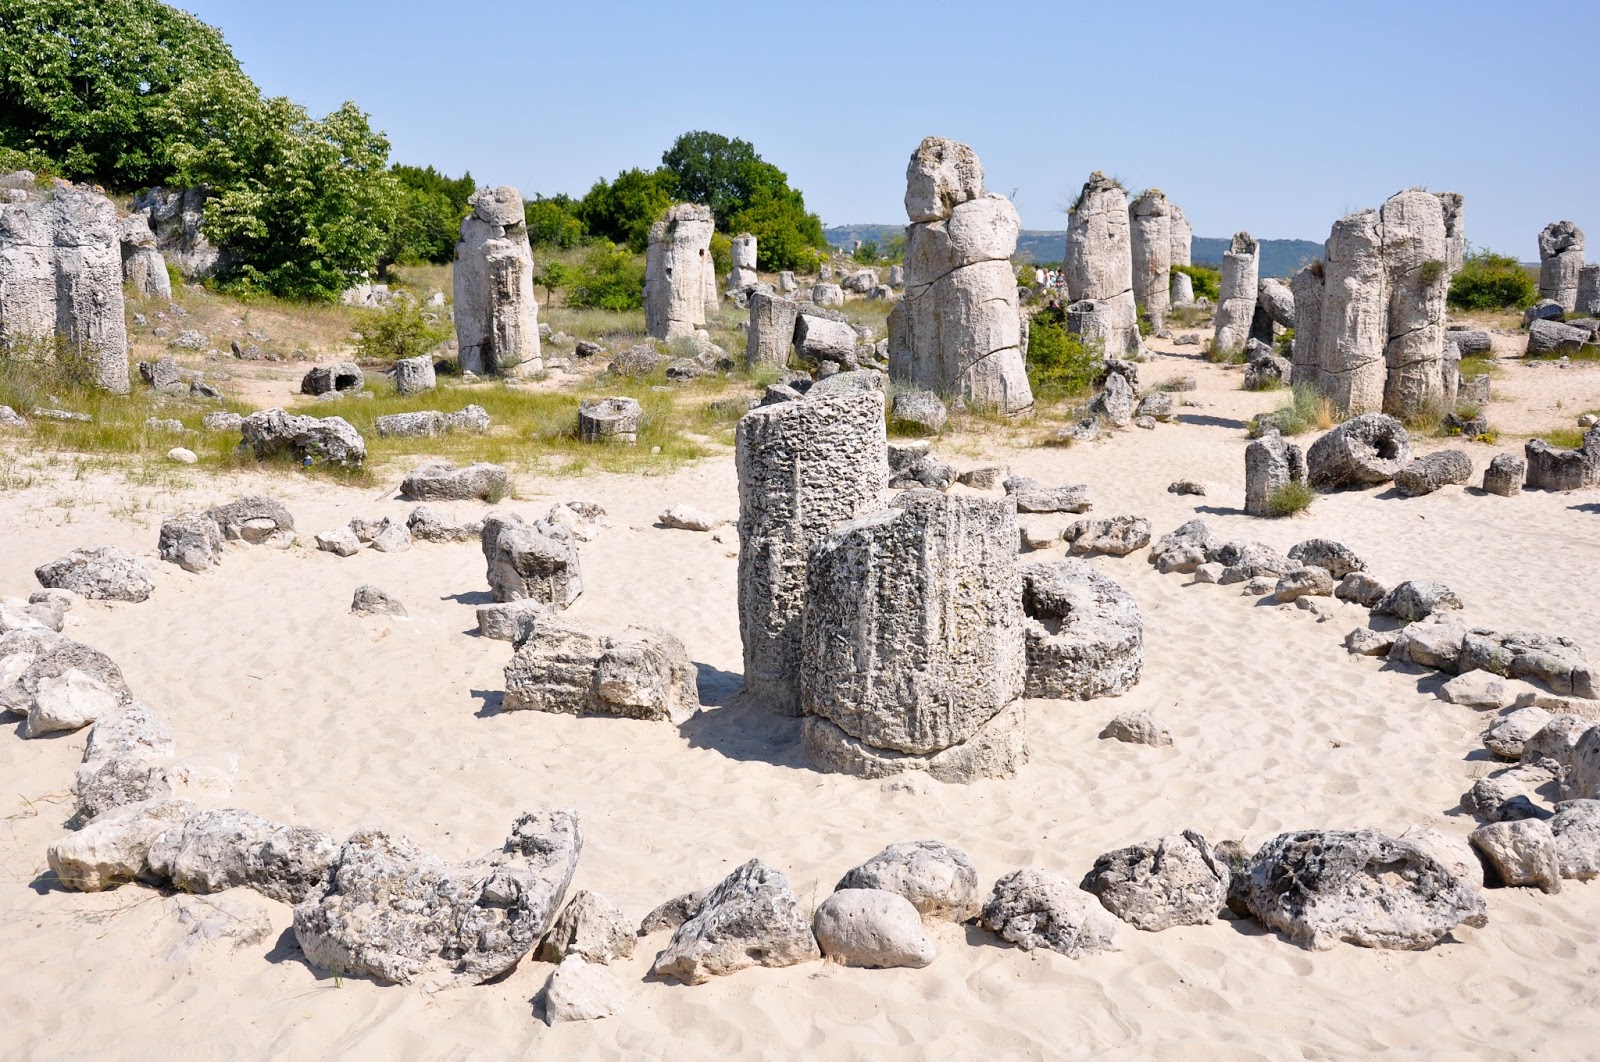 A view from the Magic Circle, The Stone Forest, Varna, Bulgaria